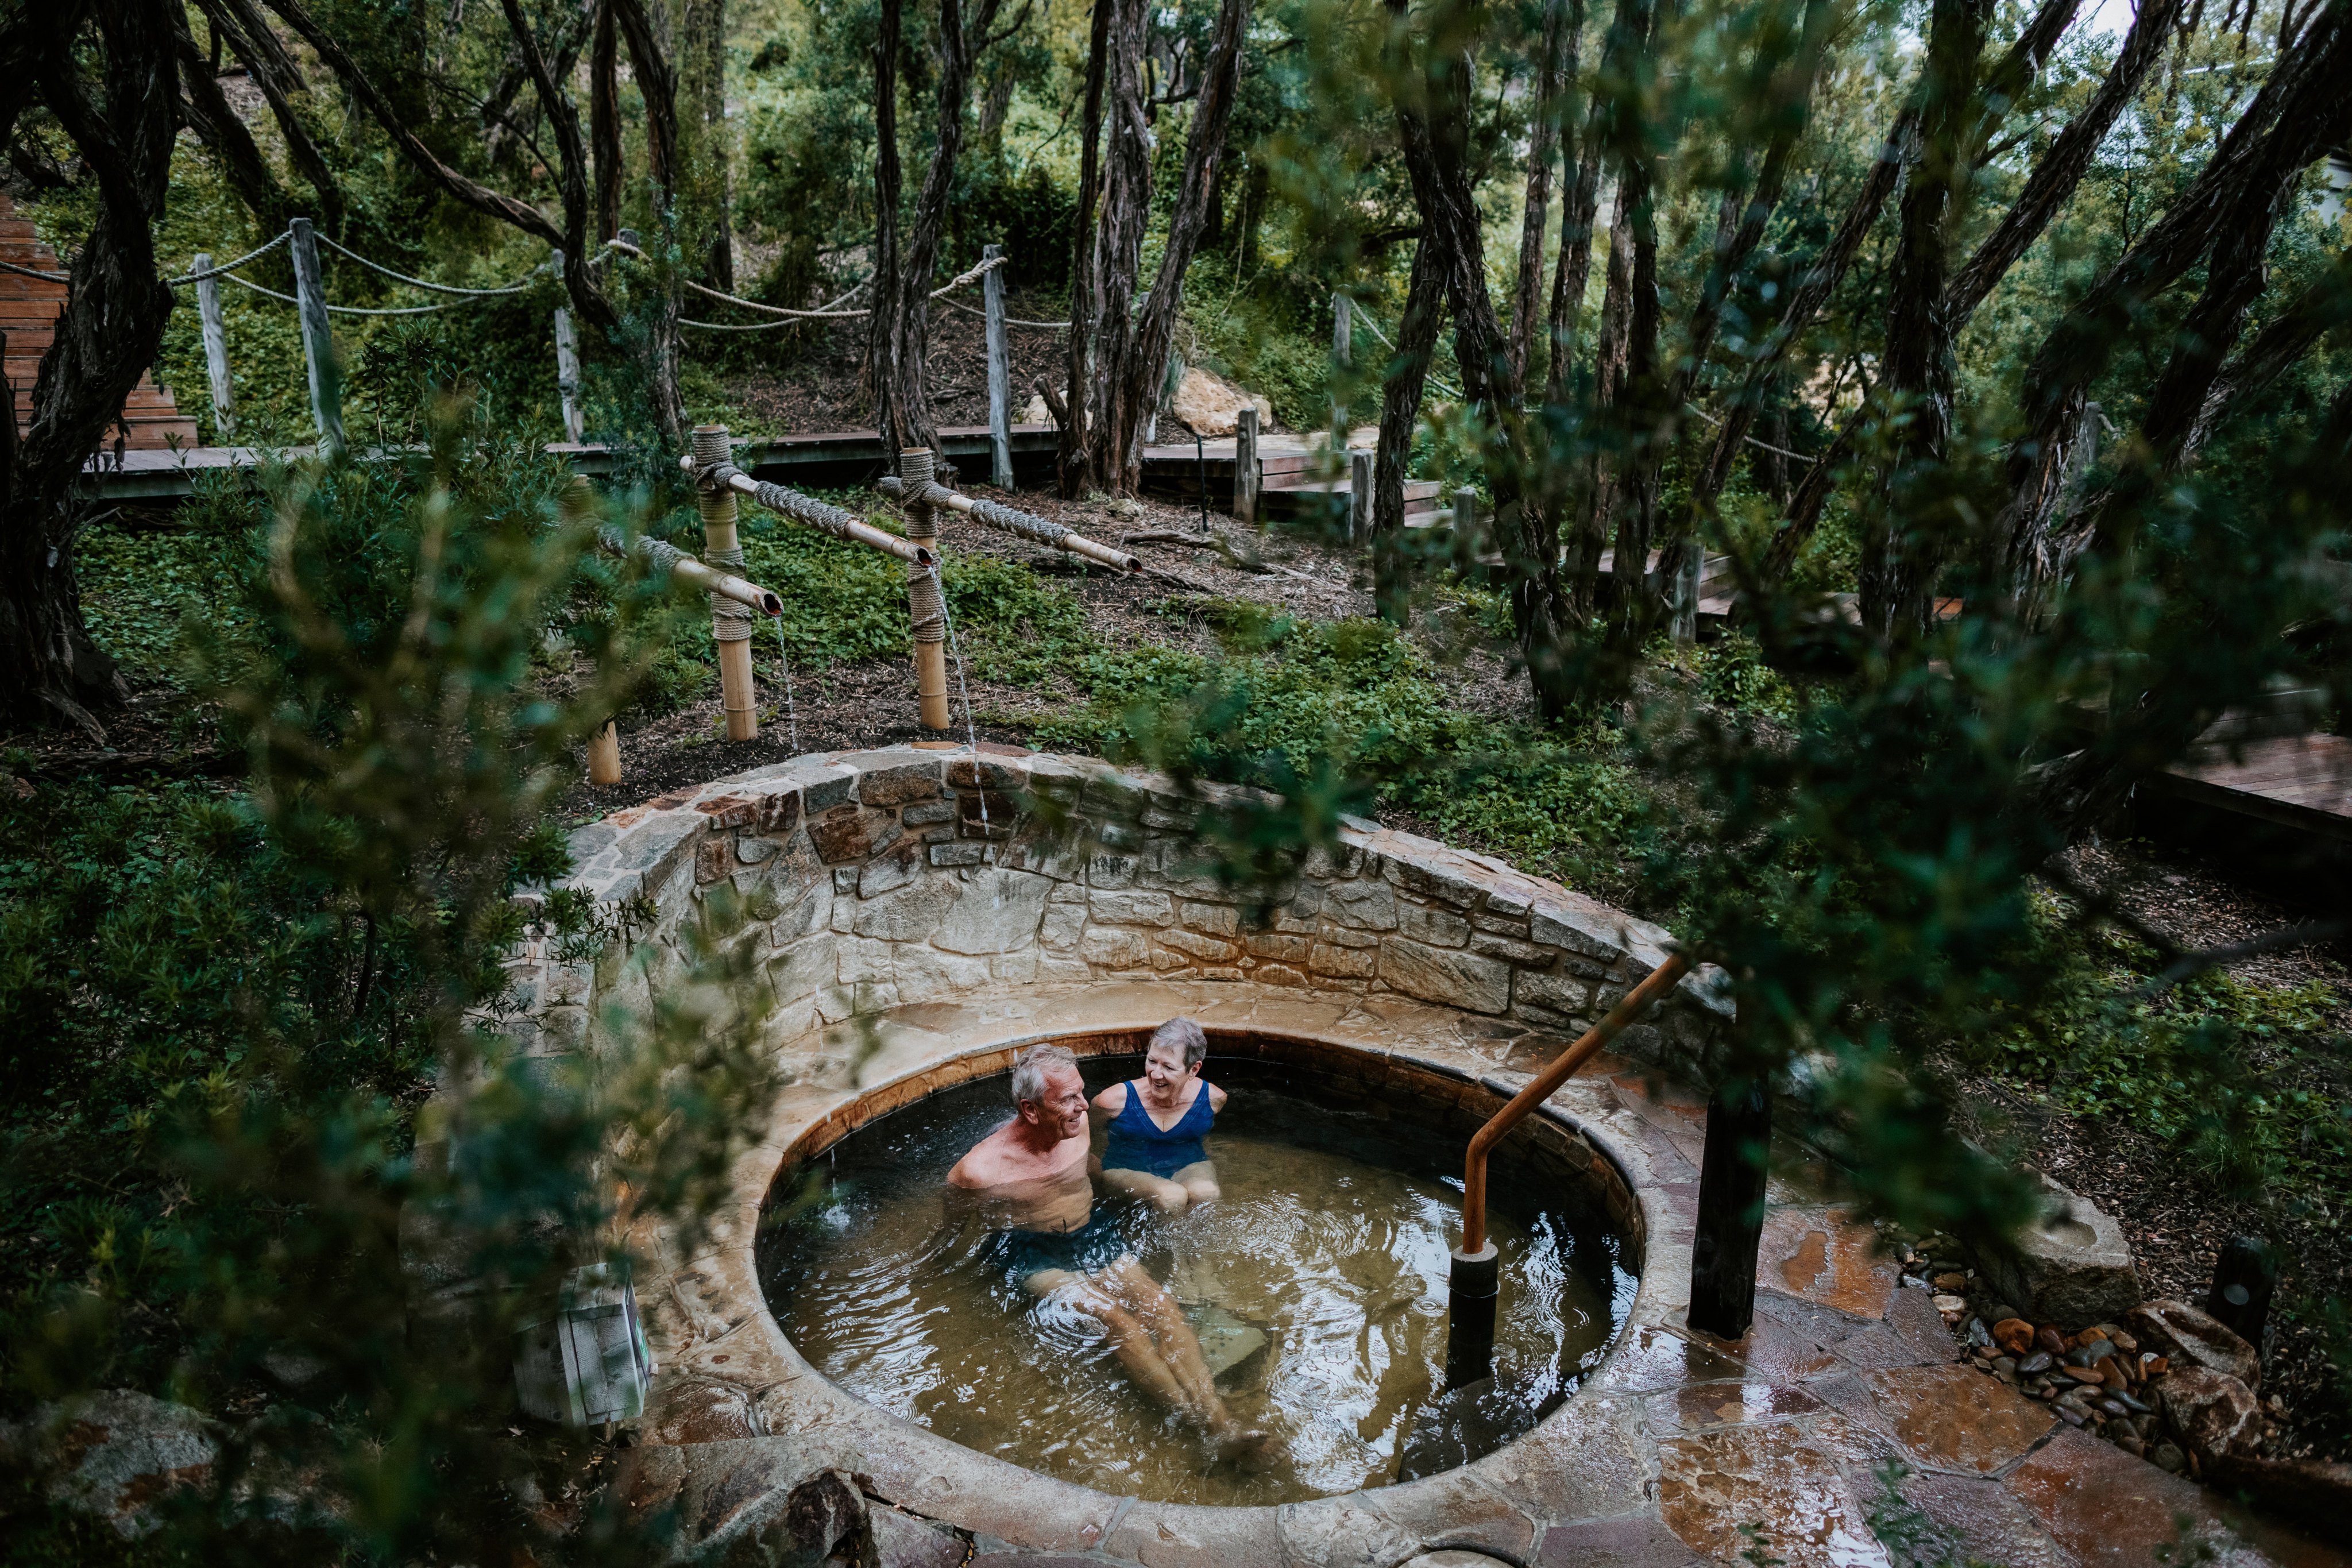 Peninsula Hot Springs is one of the first stops on a 900km tourist route of hot springs, mineral springs and sea baths being devised in Australia’s Victoria state. Photo: Peninsula Hot Springs